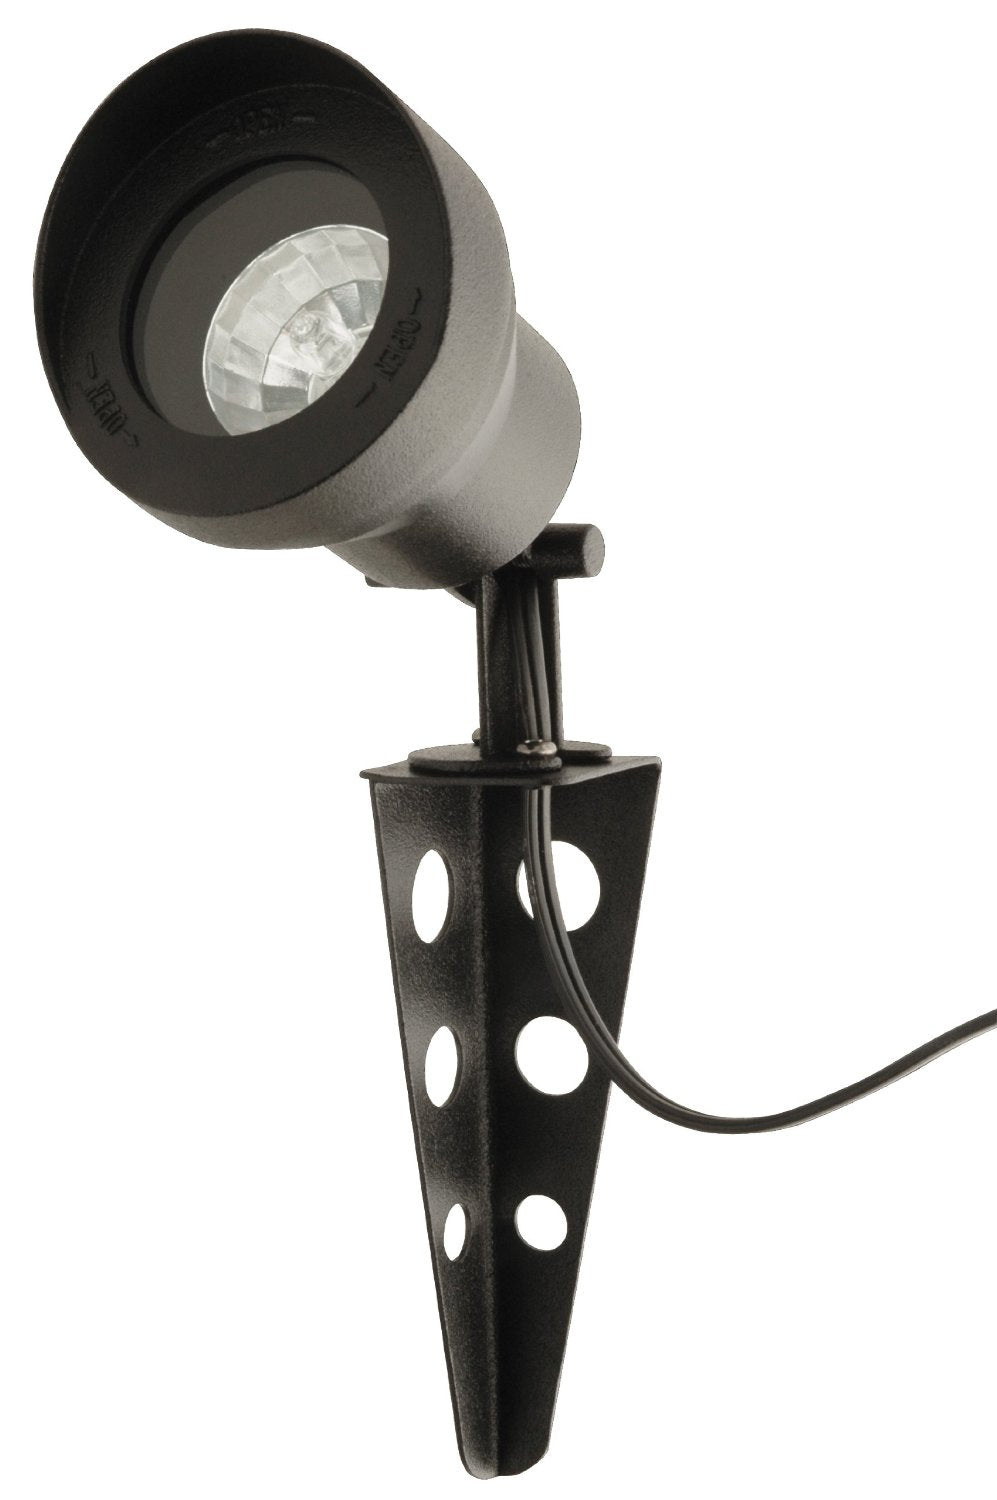 buy outdoor flood lights at cheap rate in bulk. wholesale & retail lamp supplies store. home décor ideas, maintenance, repair replacement parts